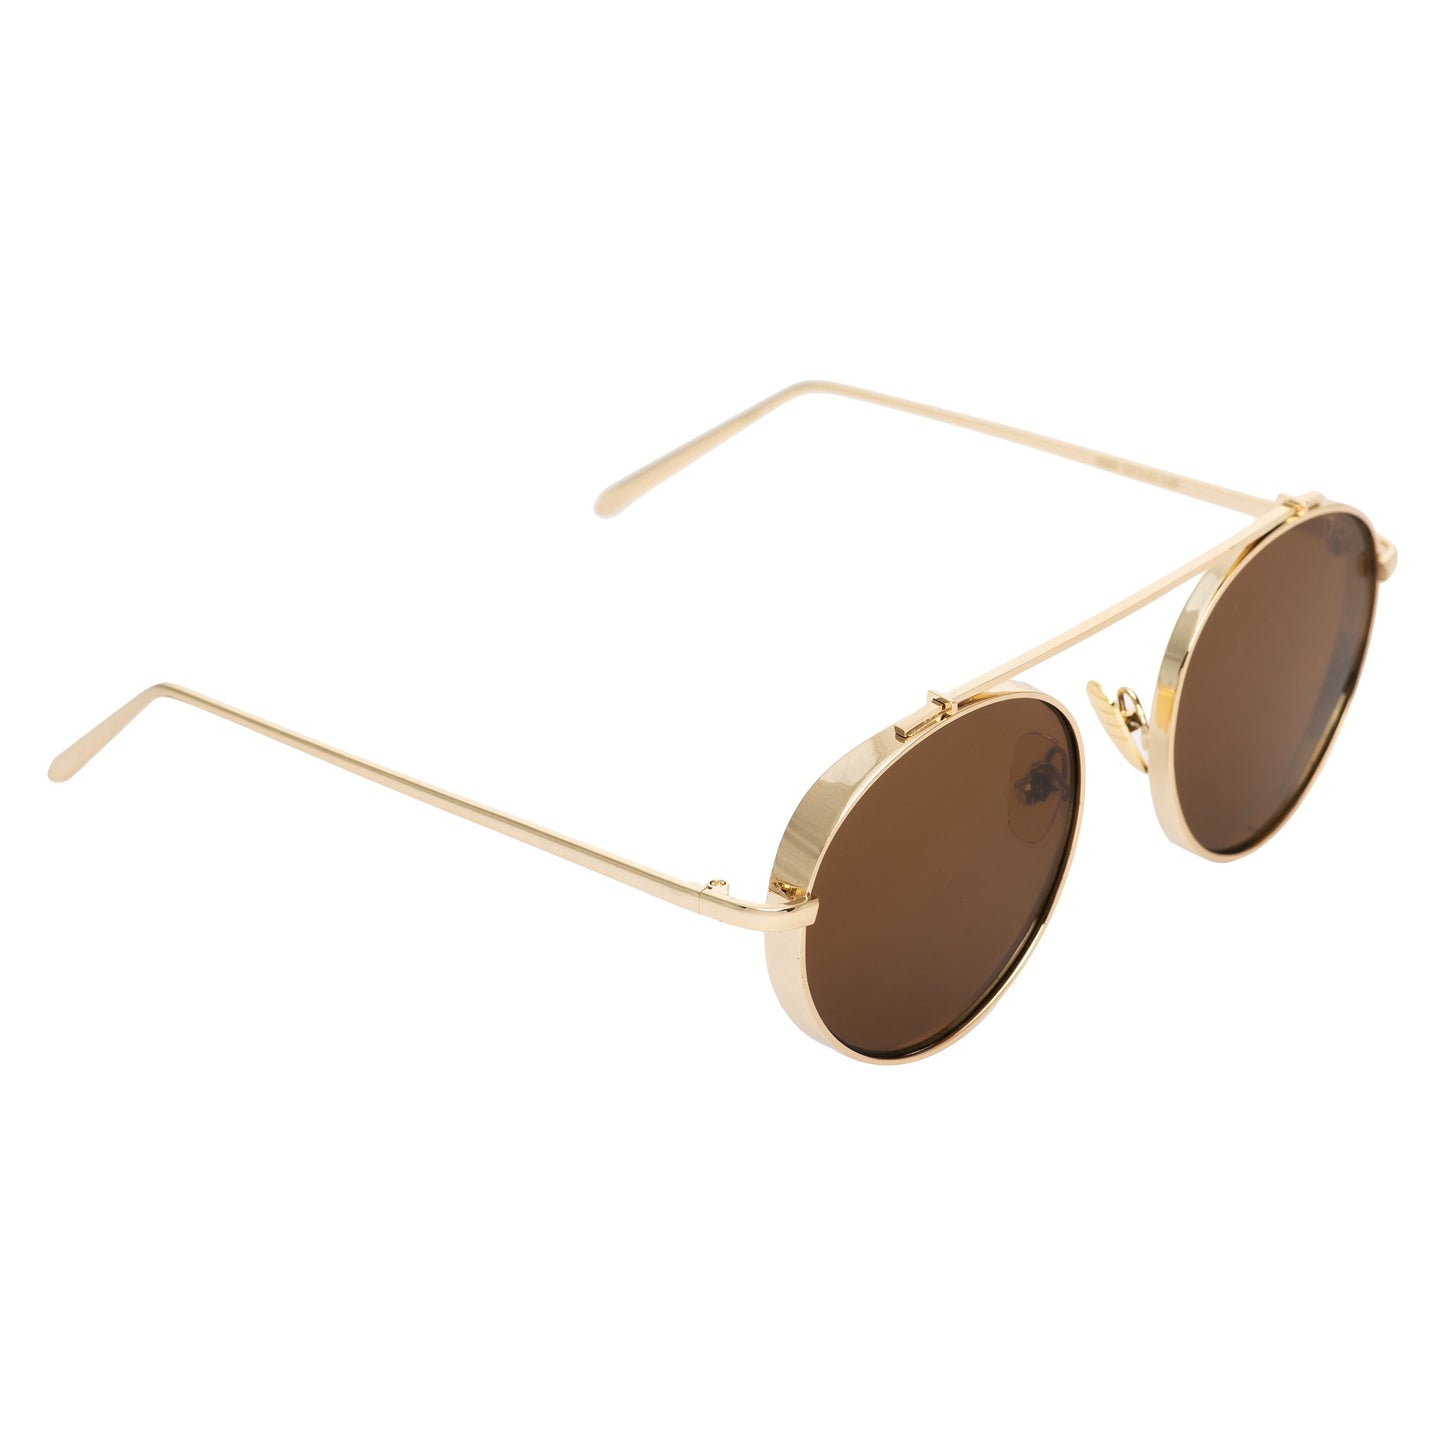 Classy Round Brown And Gold Sunglasses